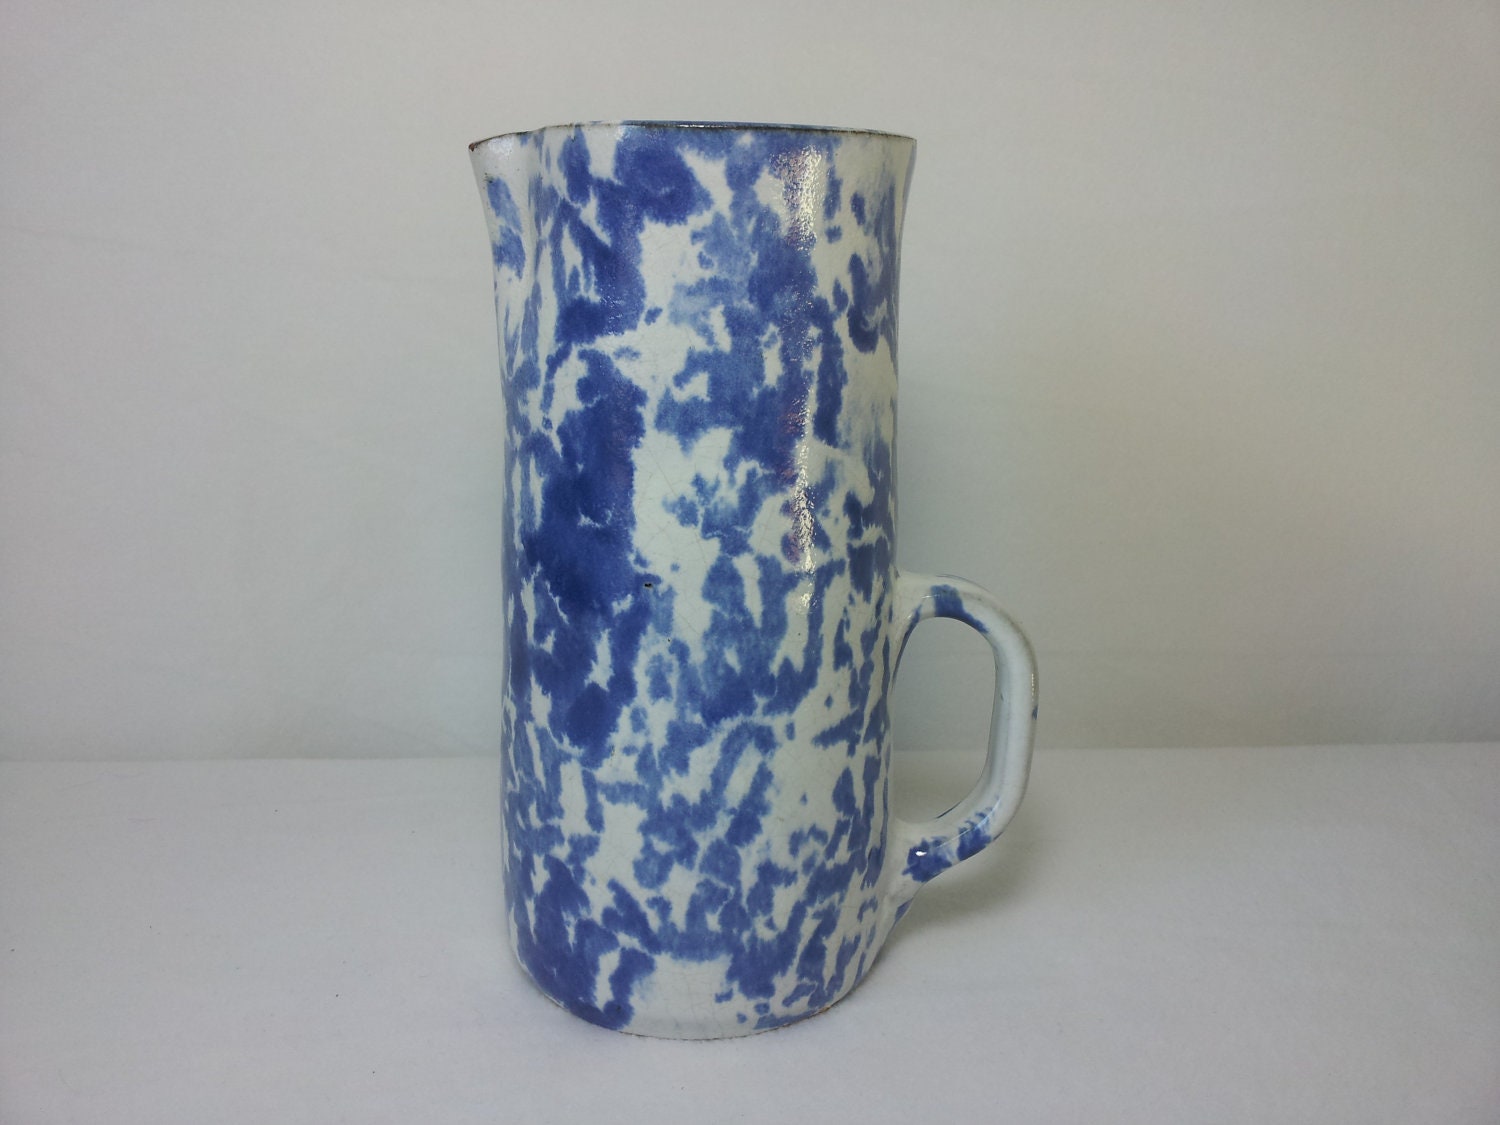 A.R. Cole Pottery Sanford N.C. Blue and White Splatter Pitcher Number 244